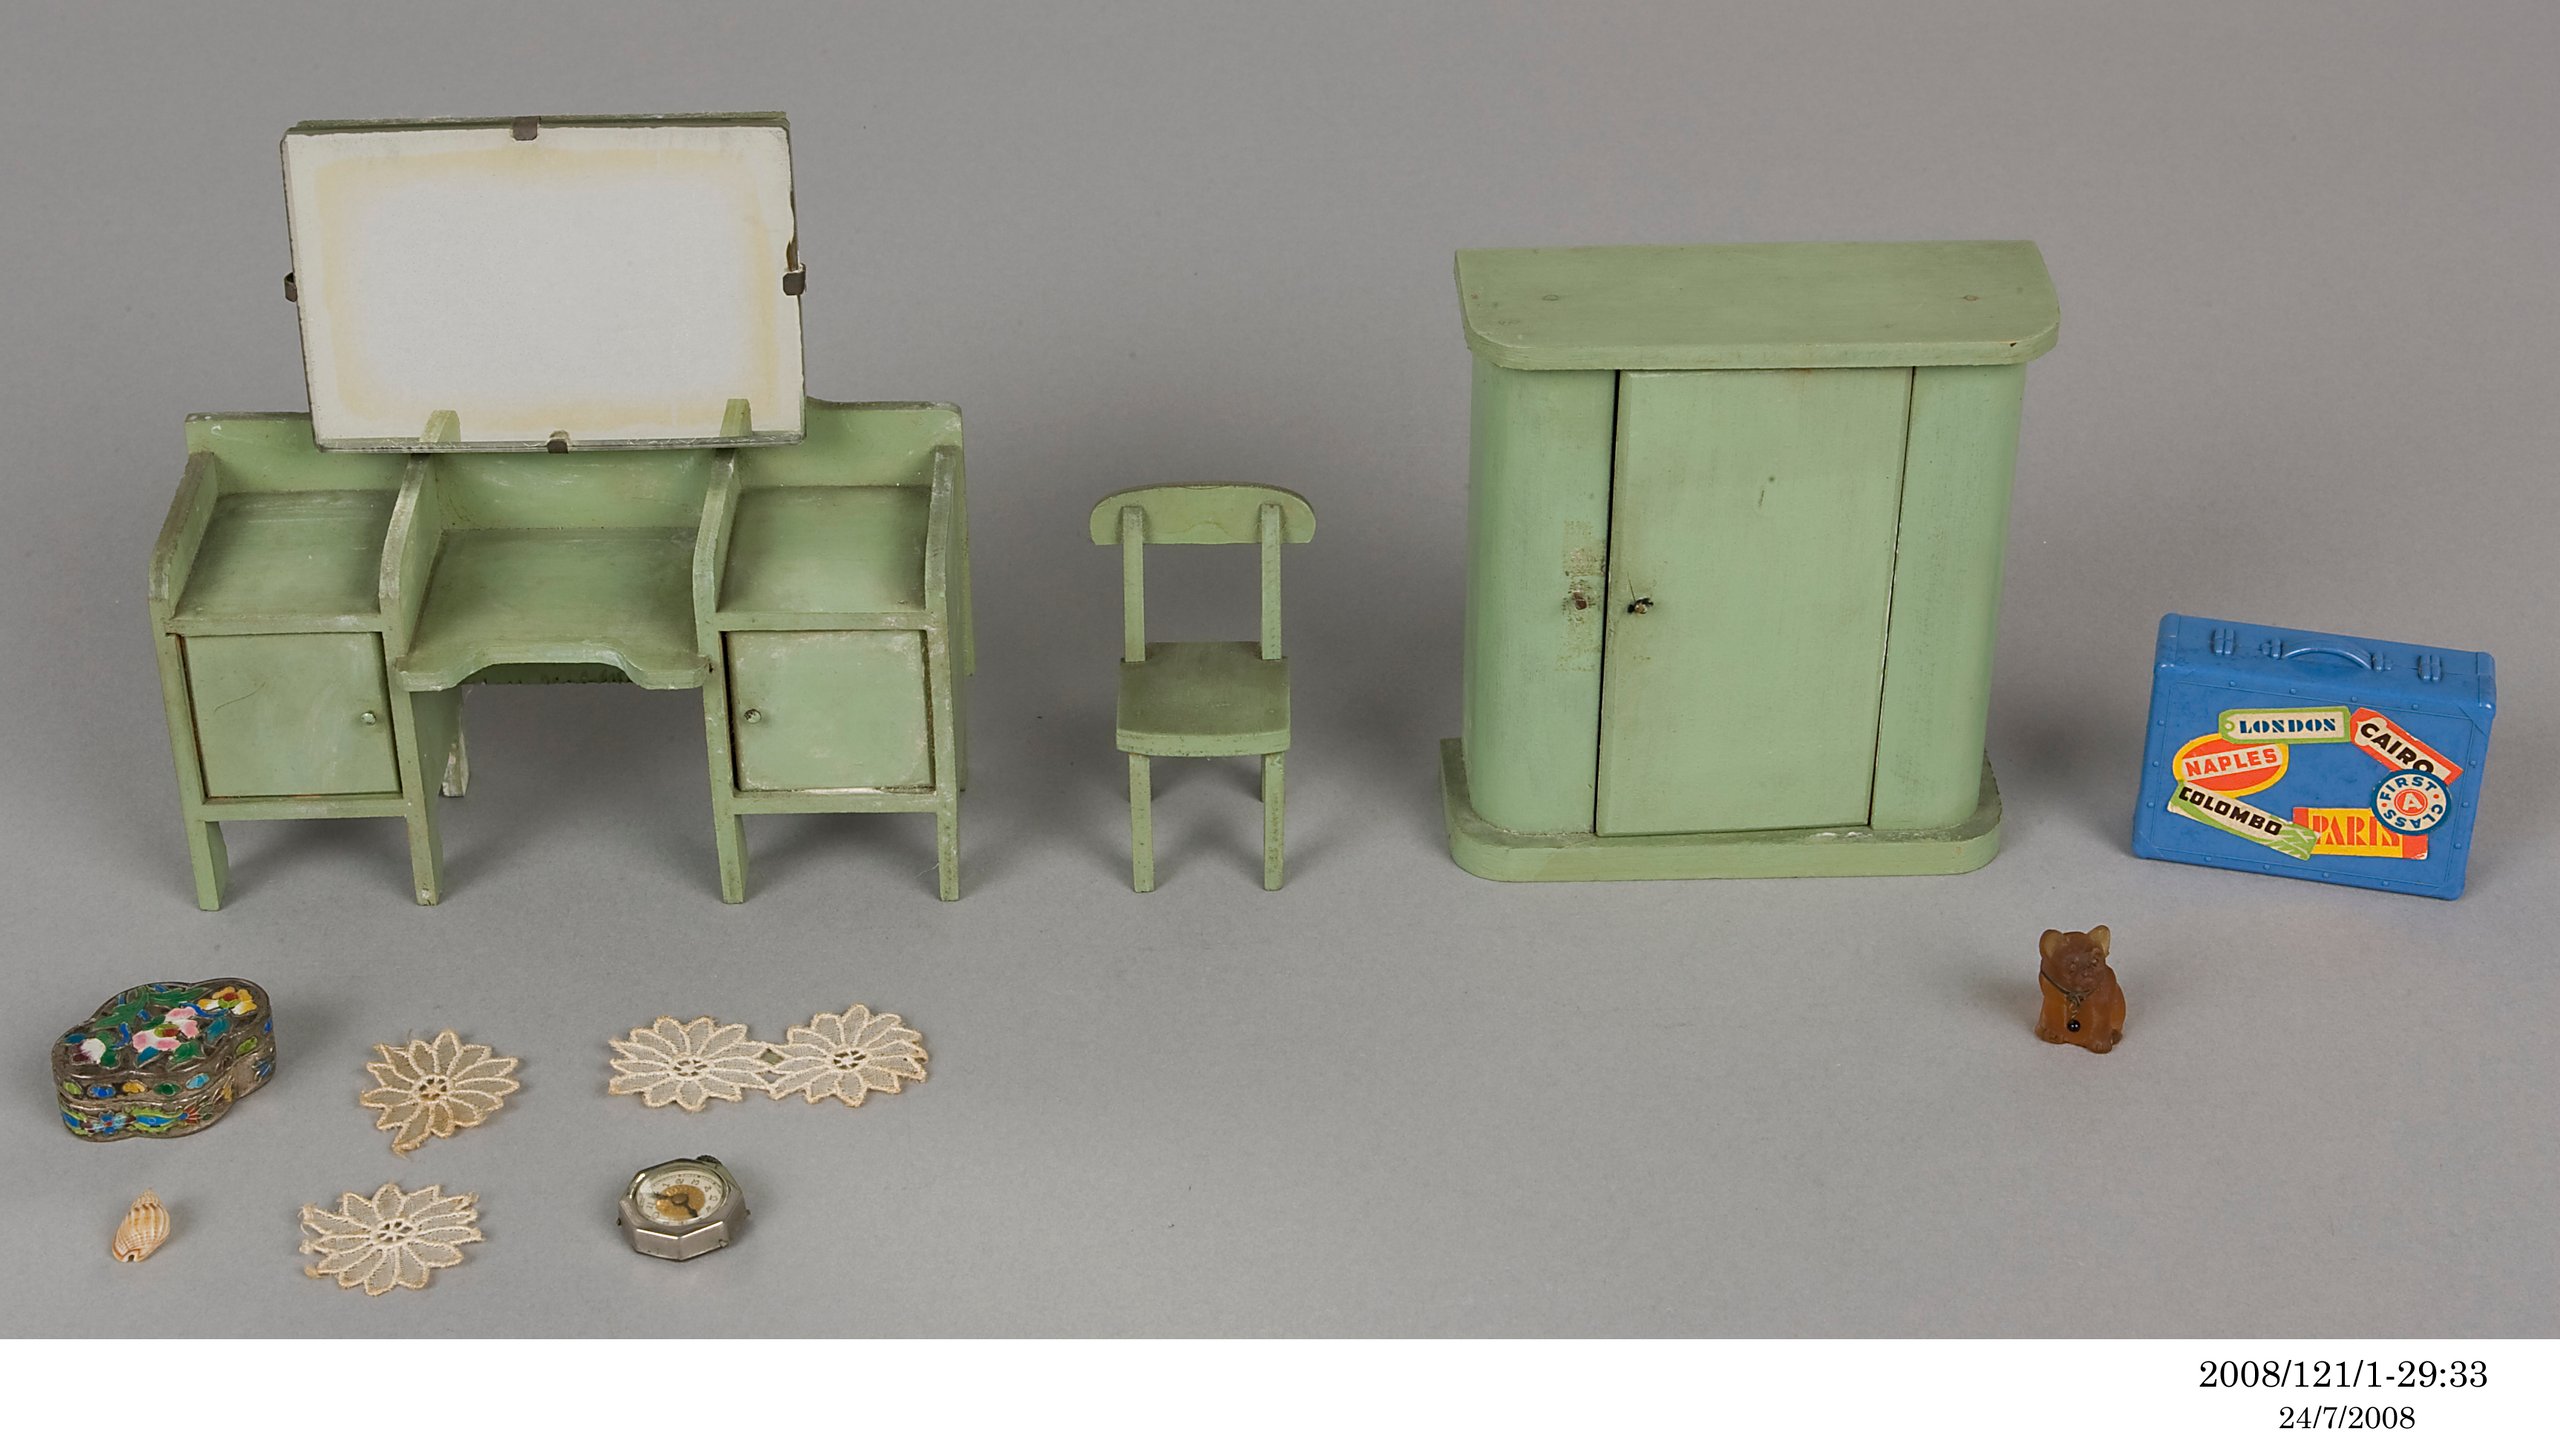 Doll's house and contents